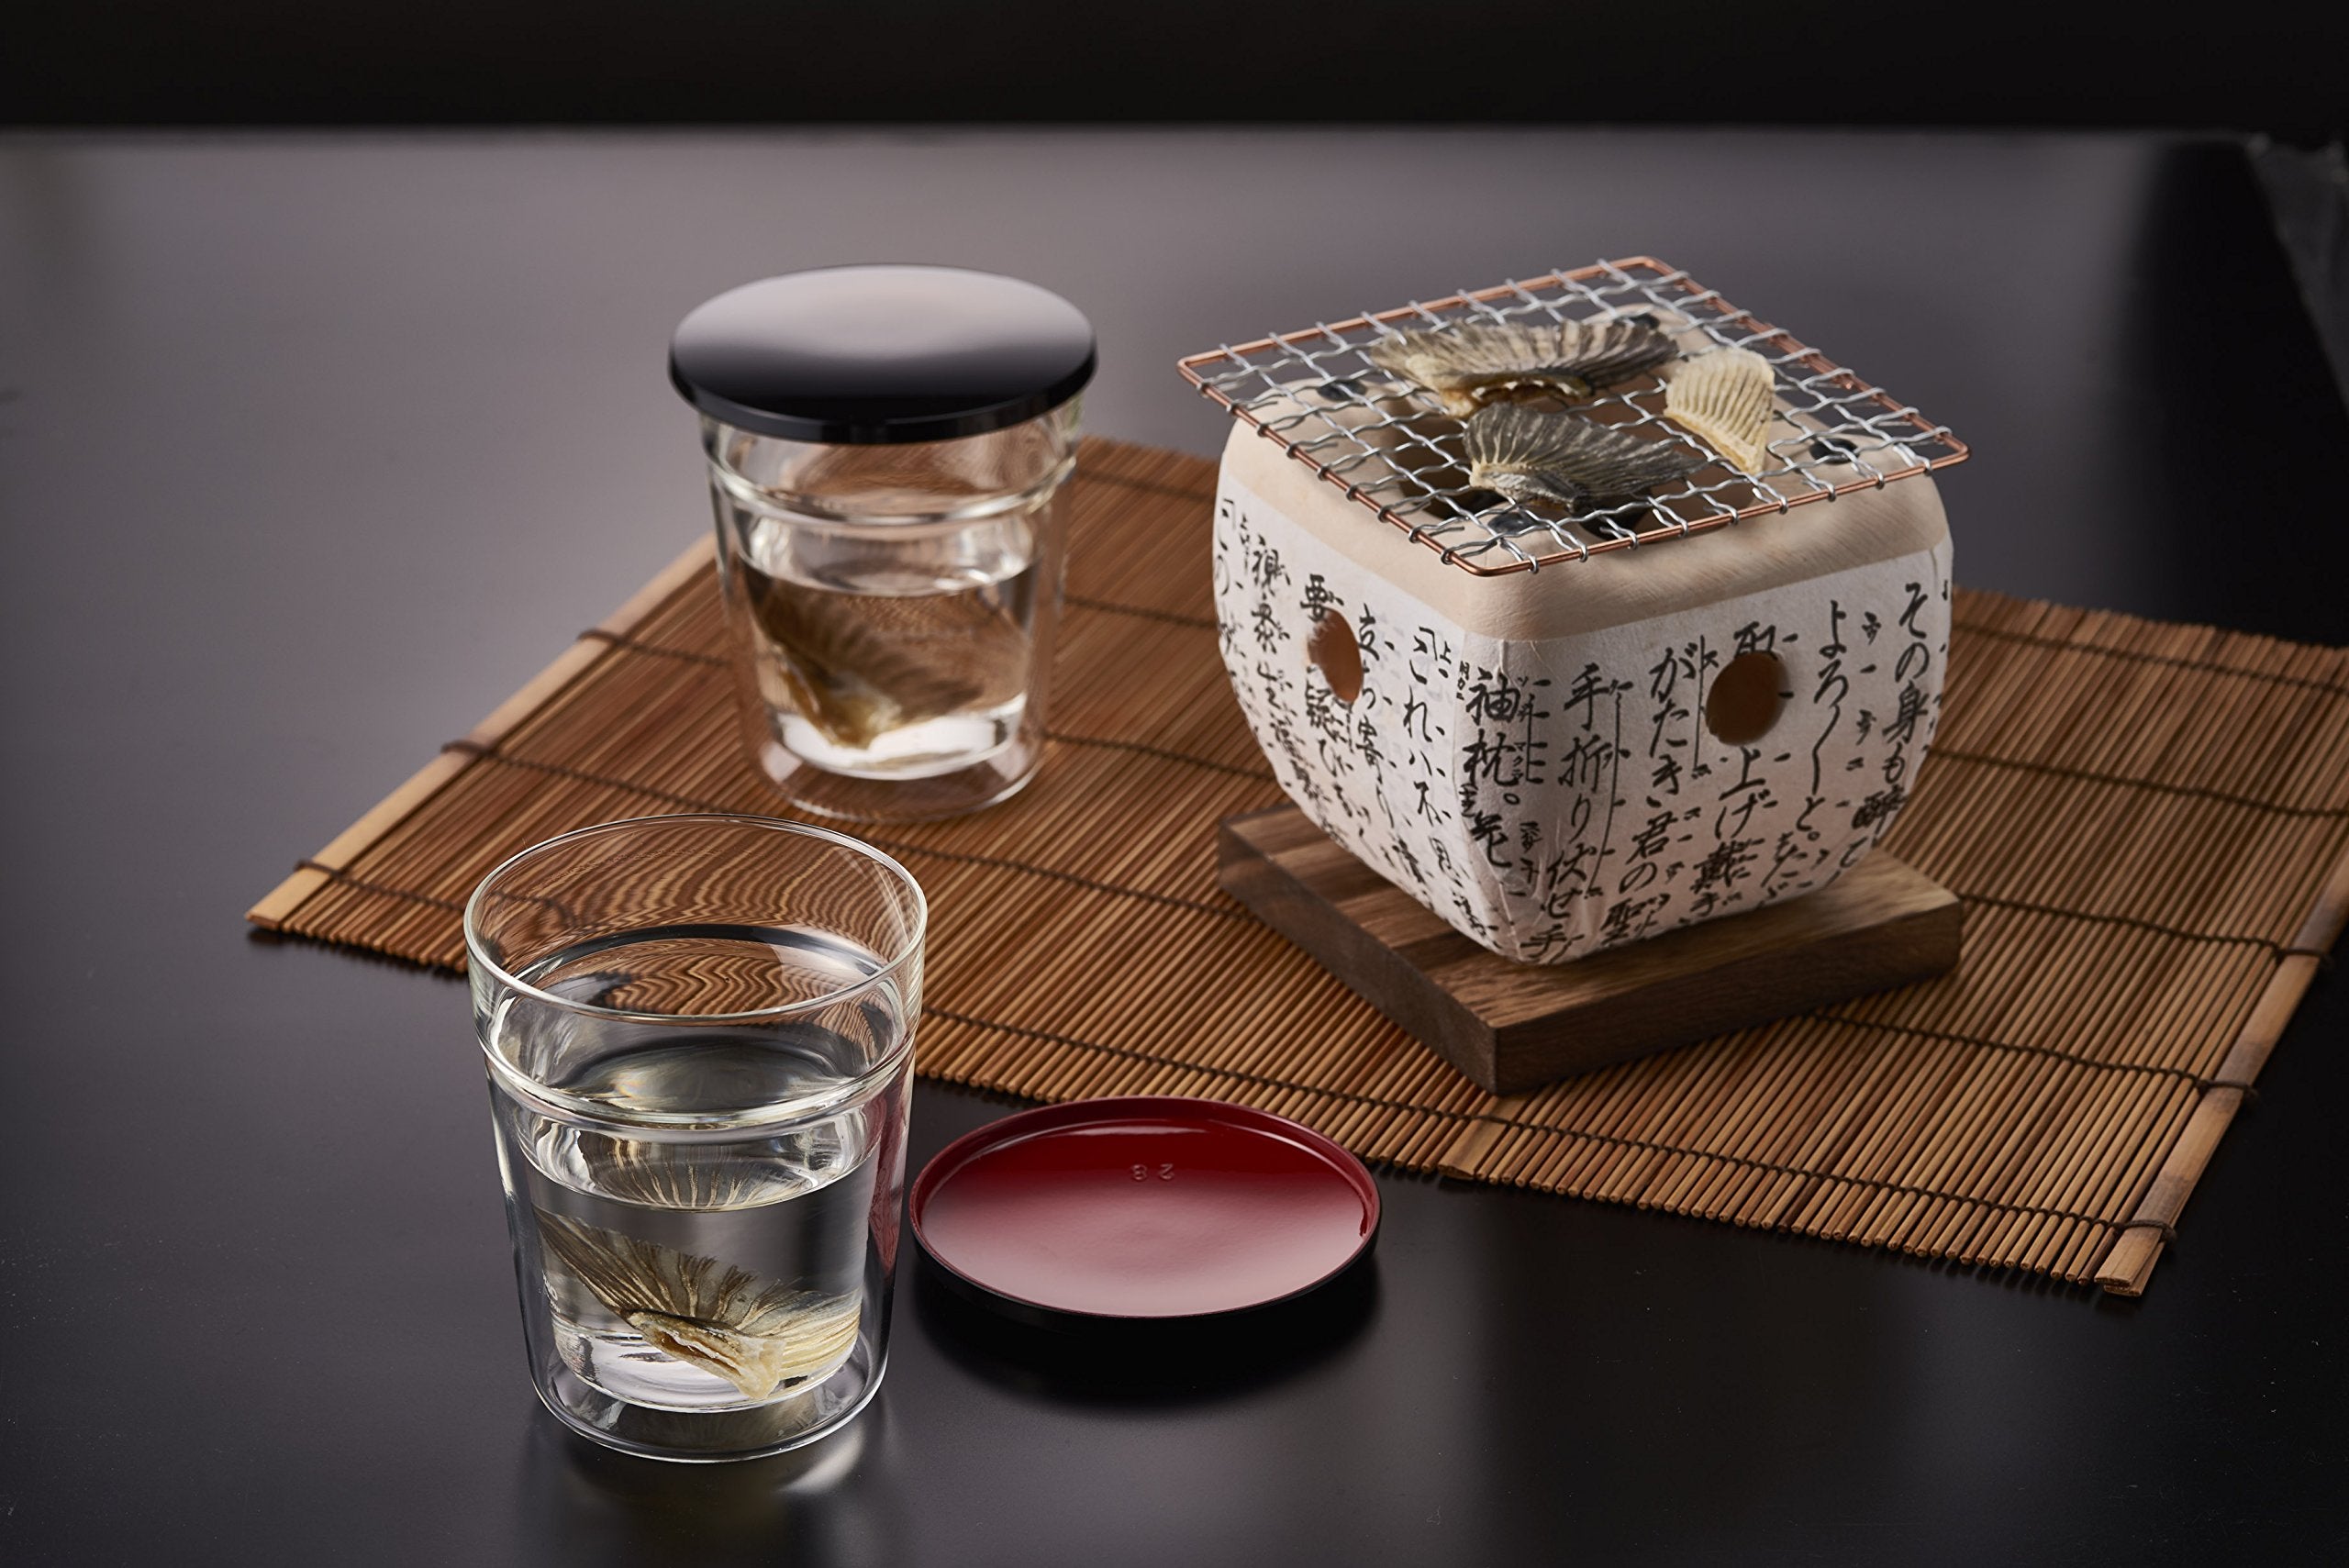 Hario Glass Sake Cup 1 Cup GHK-180